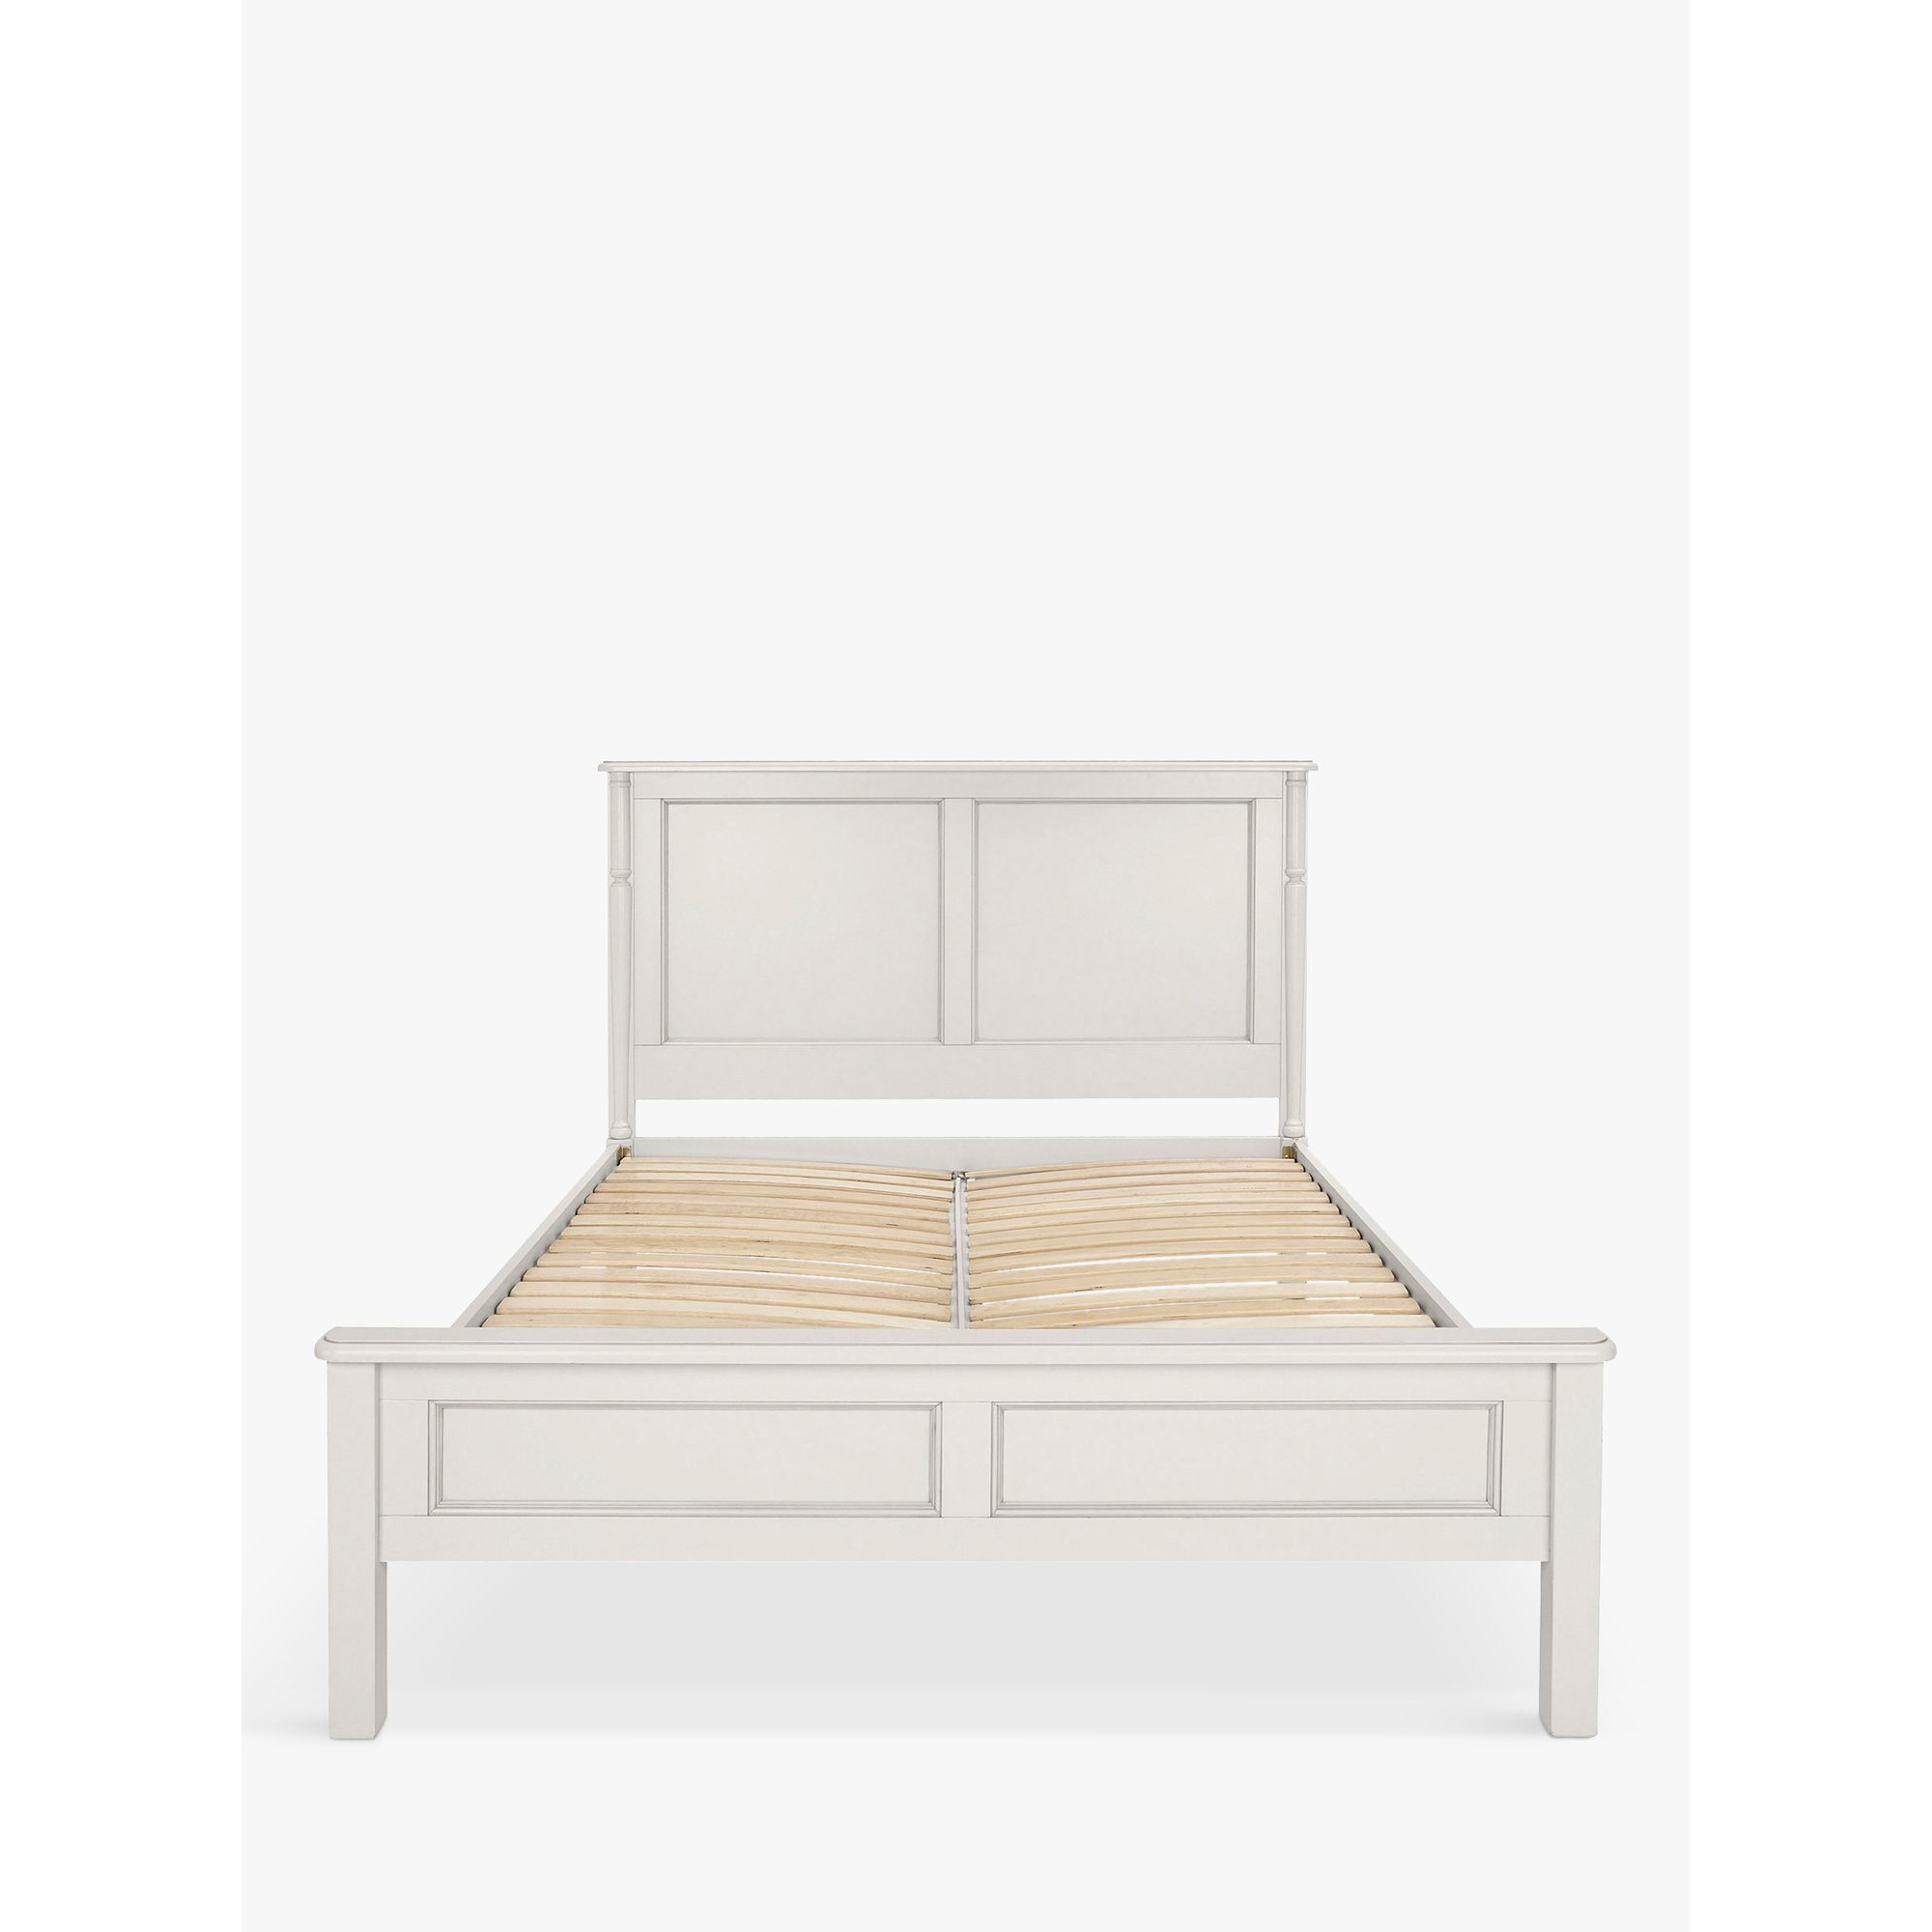 Laura Ashley Clifton Bed Frame, King Size, Grey - image 1